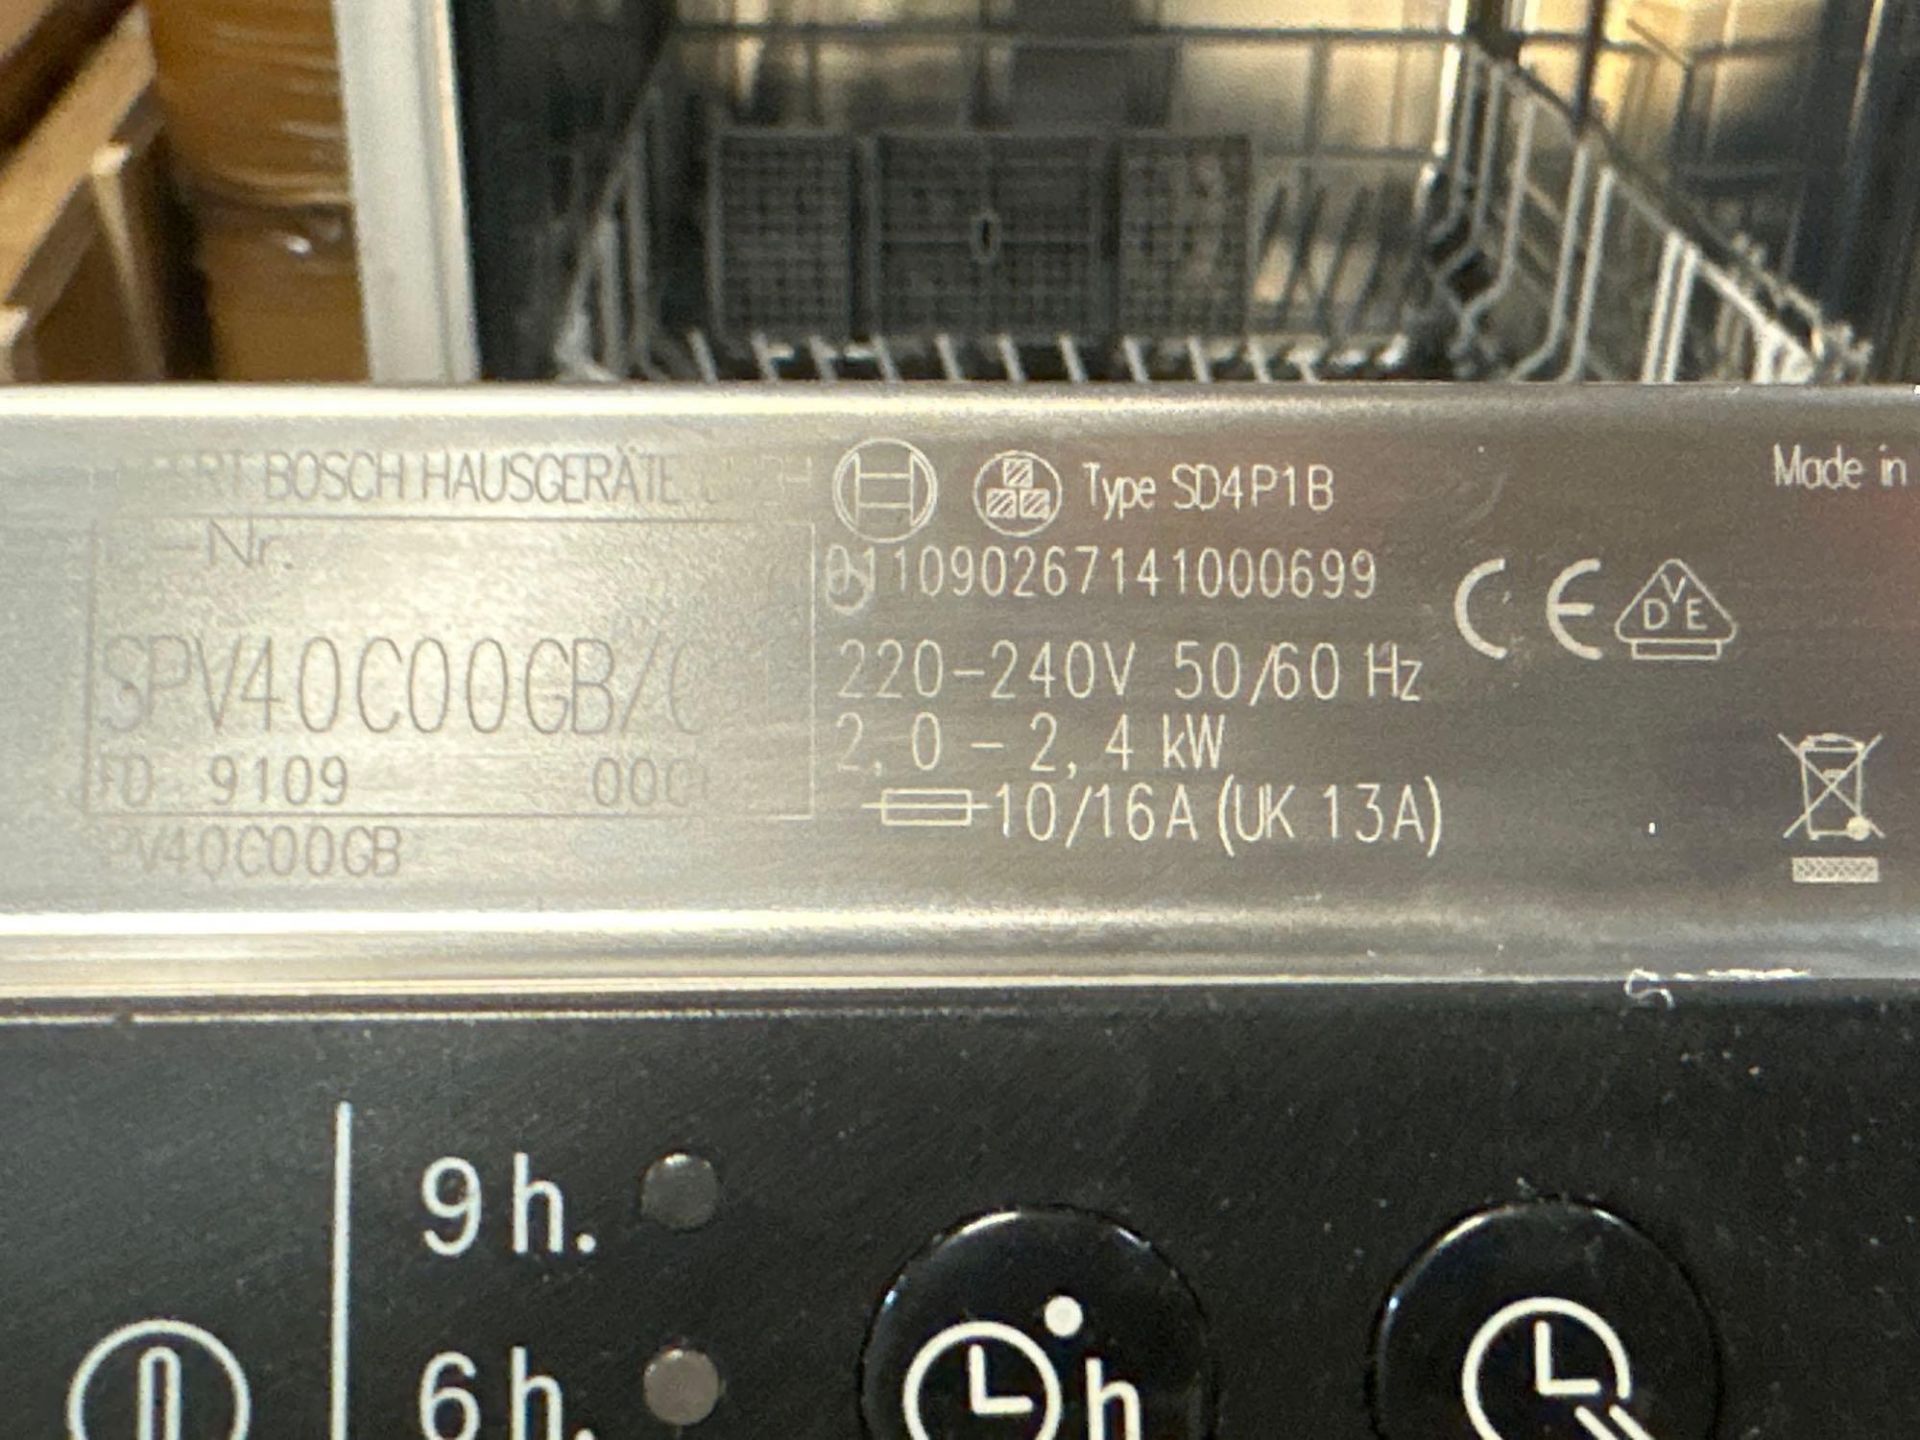 Bosch SD13JT1B integrated dishwasher 13 place setting capacity 45 x 56 x 80cm. - Image 2 of 3